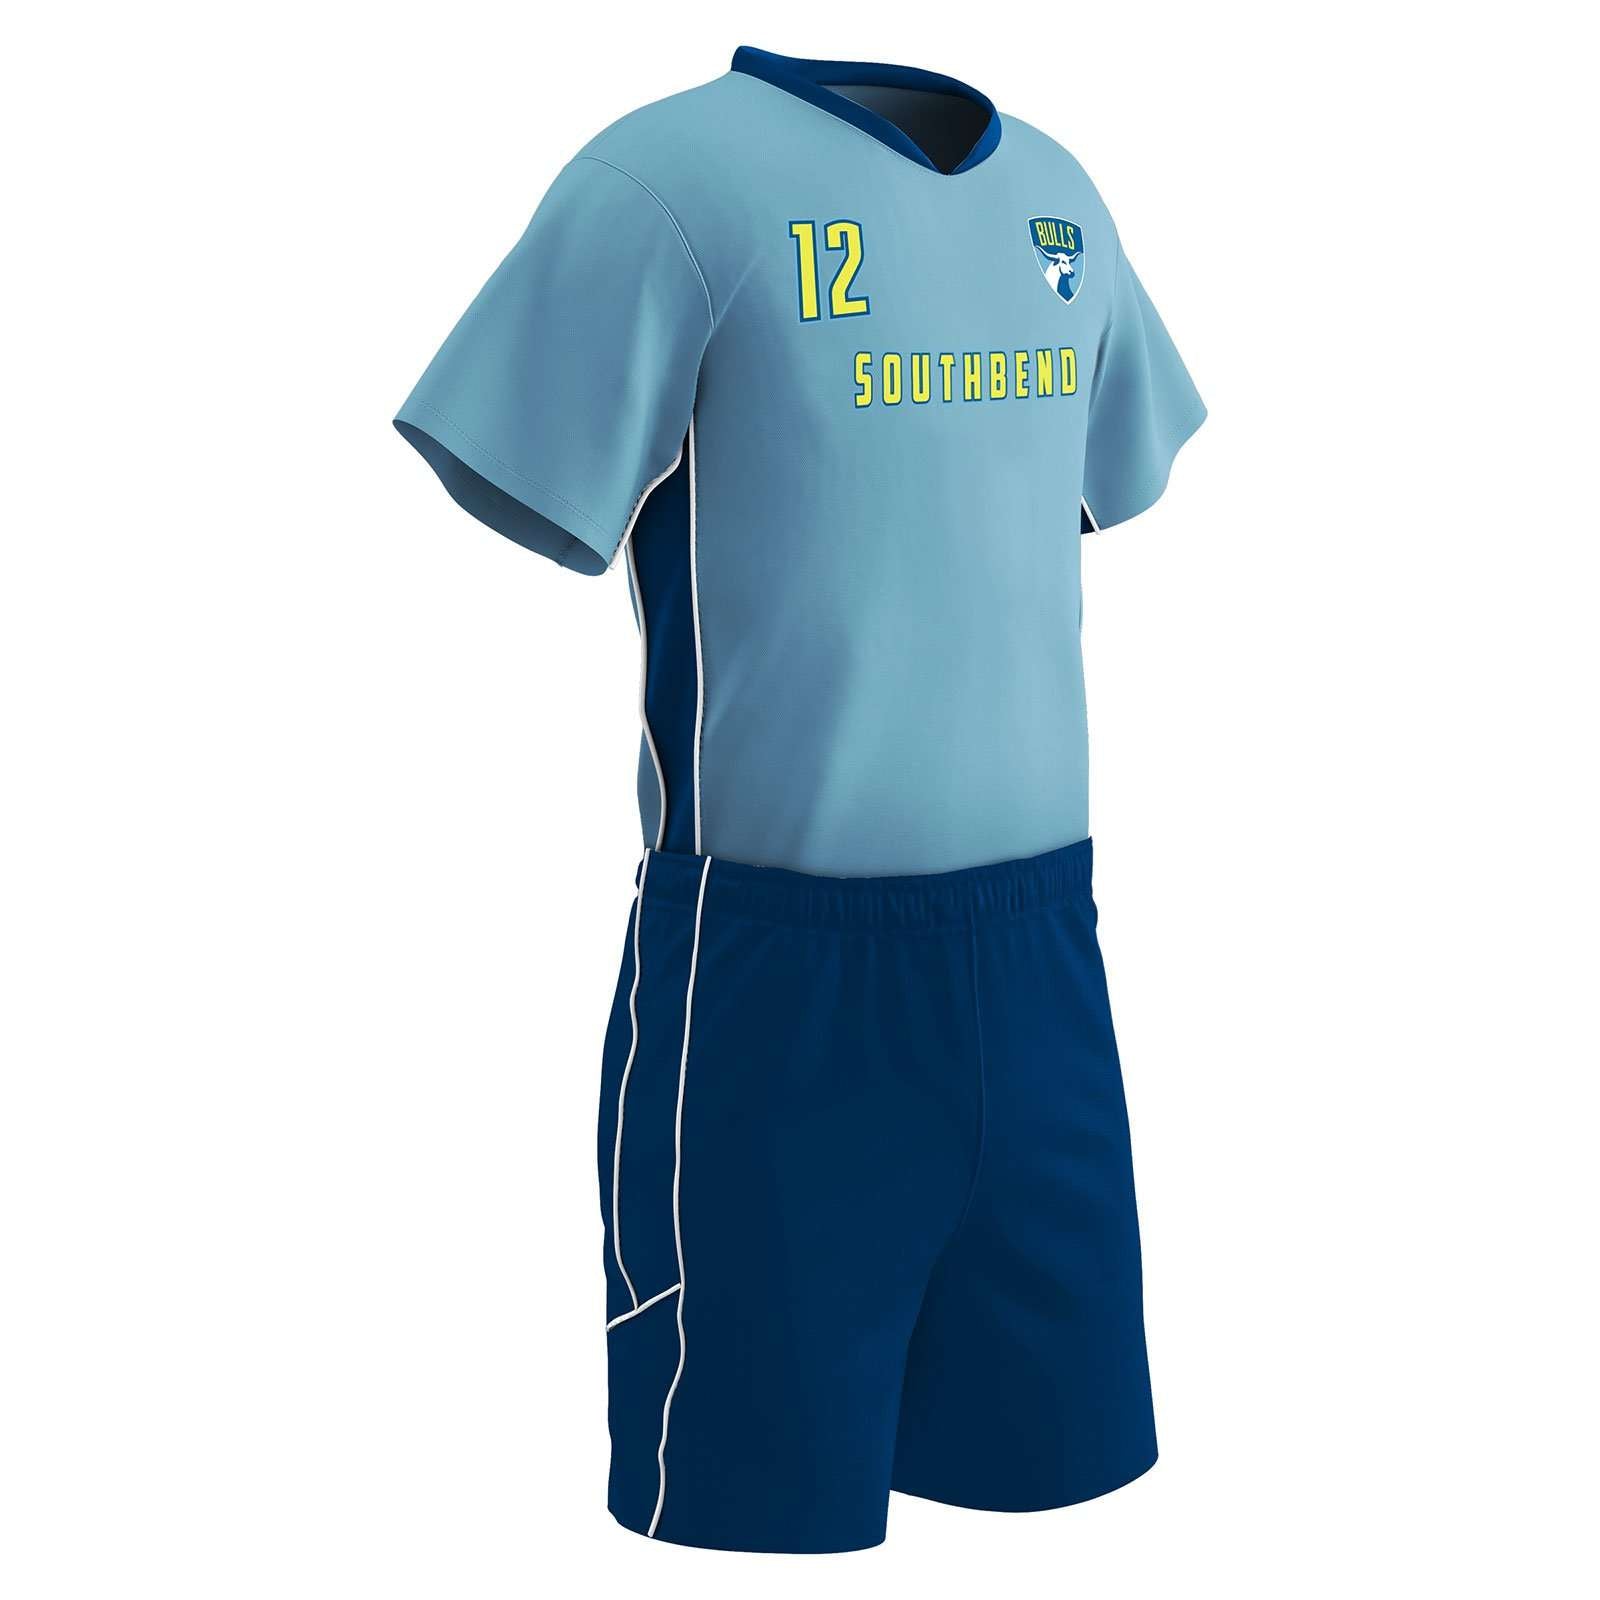 Champro Sports Header Lightweight Soccer Jersey, Youth Small